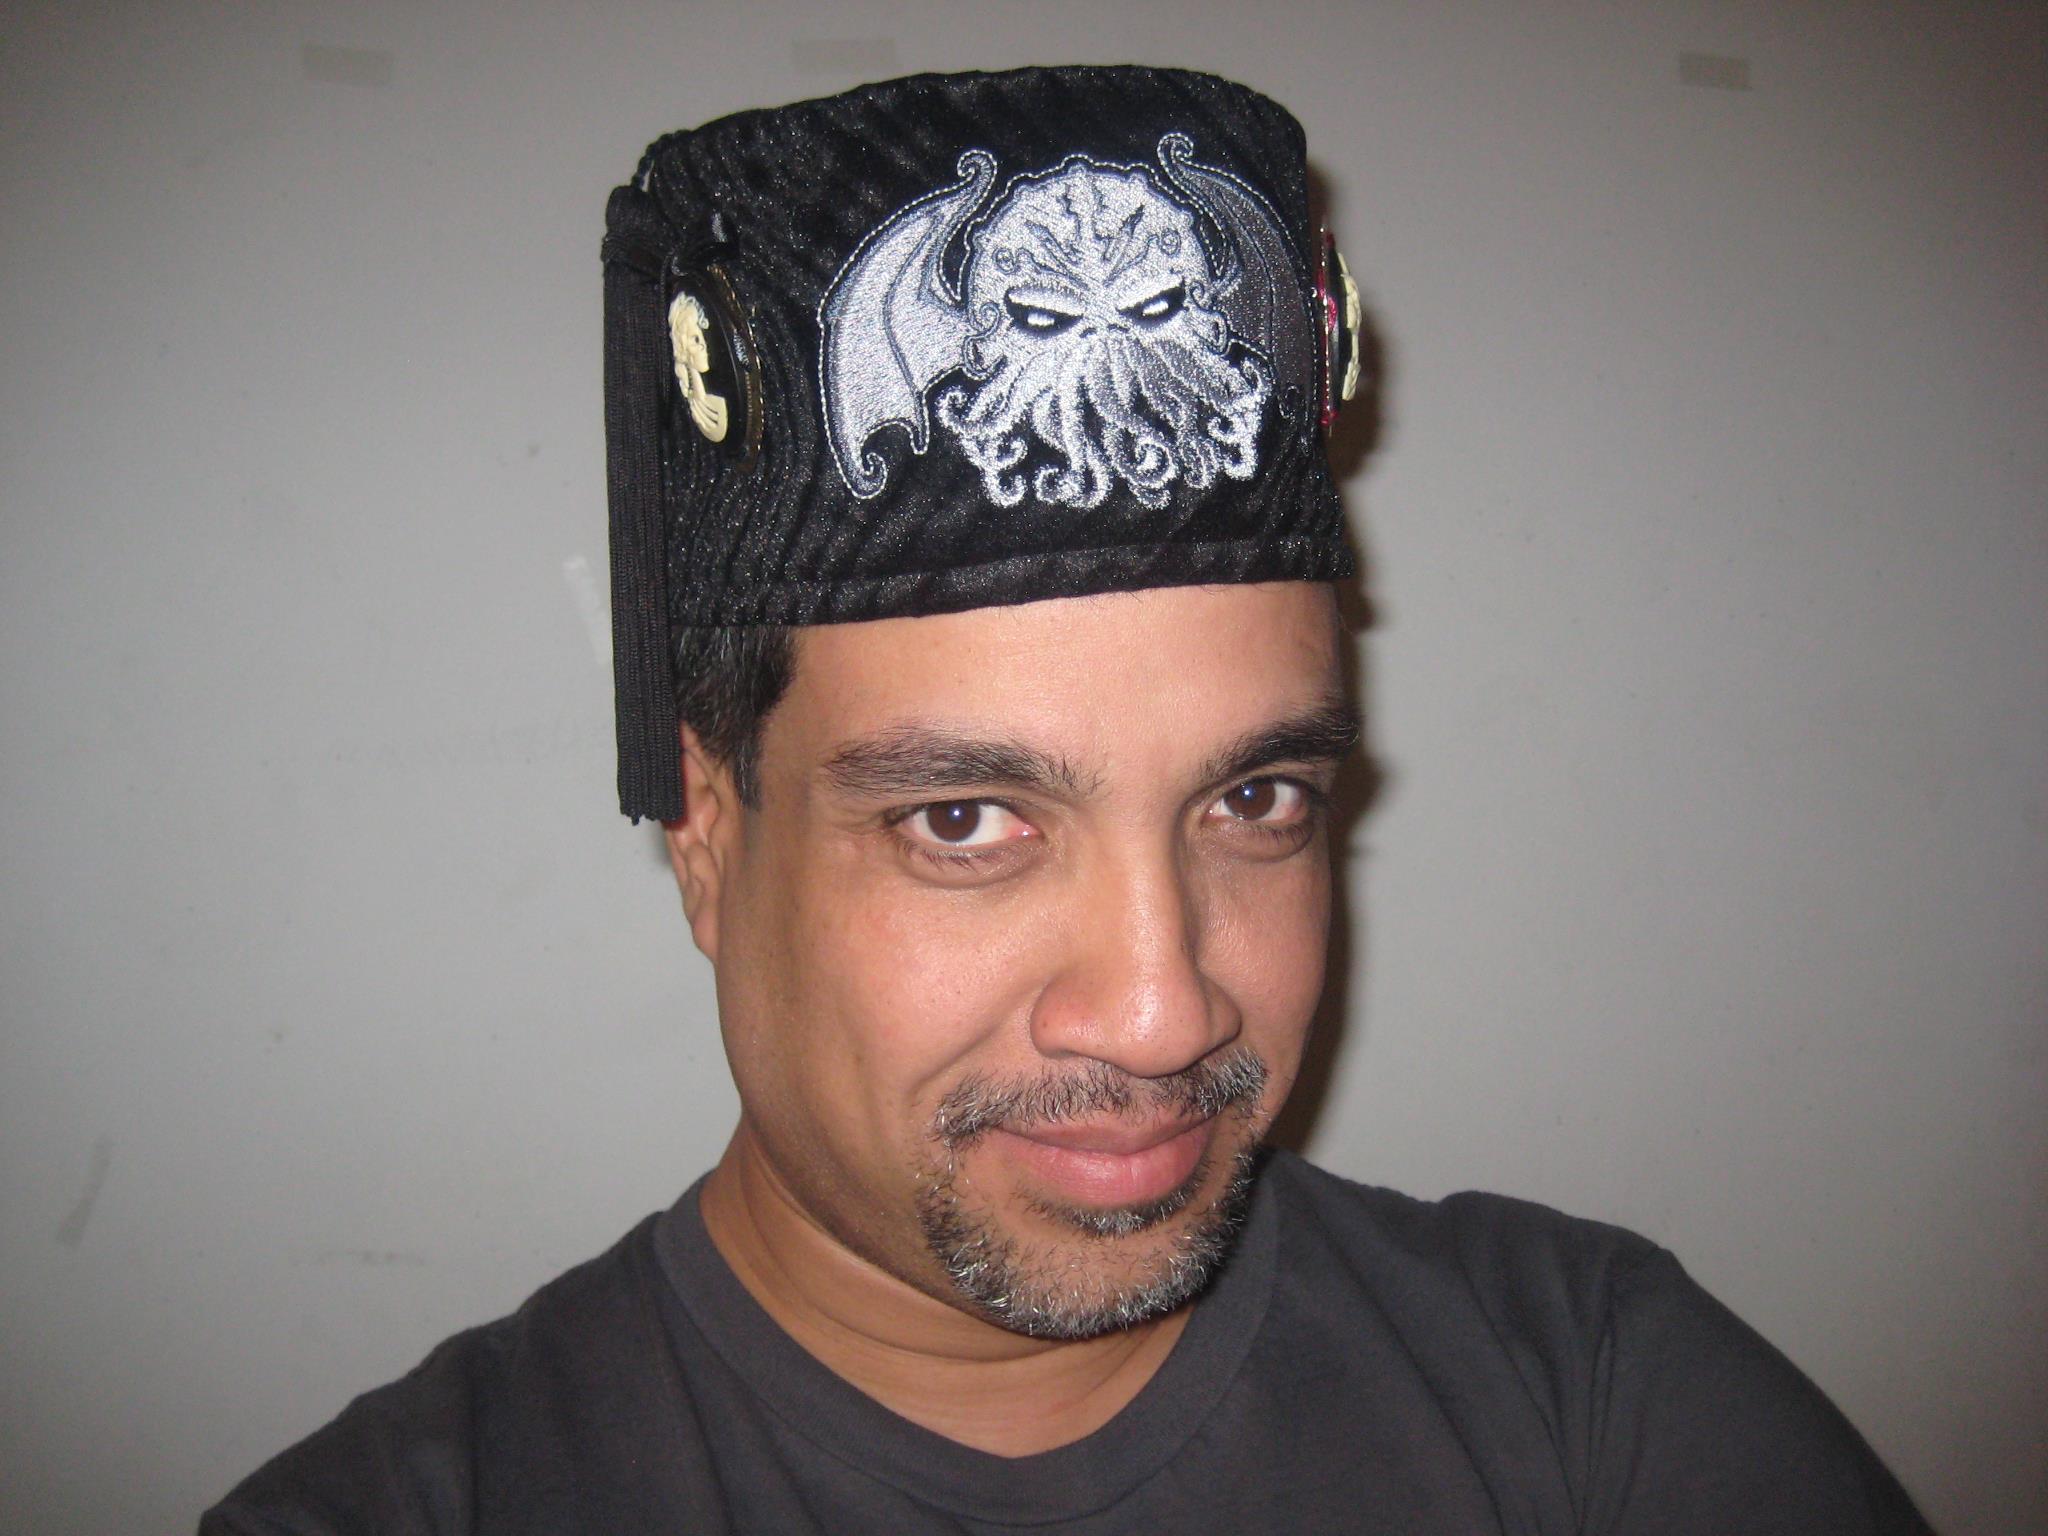 Image is Oscar Rios, a middle aged latino man with a van dyke beard & a black fez bearing the image of cthulhu on it.